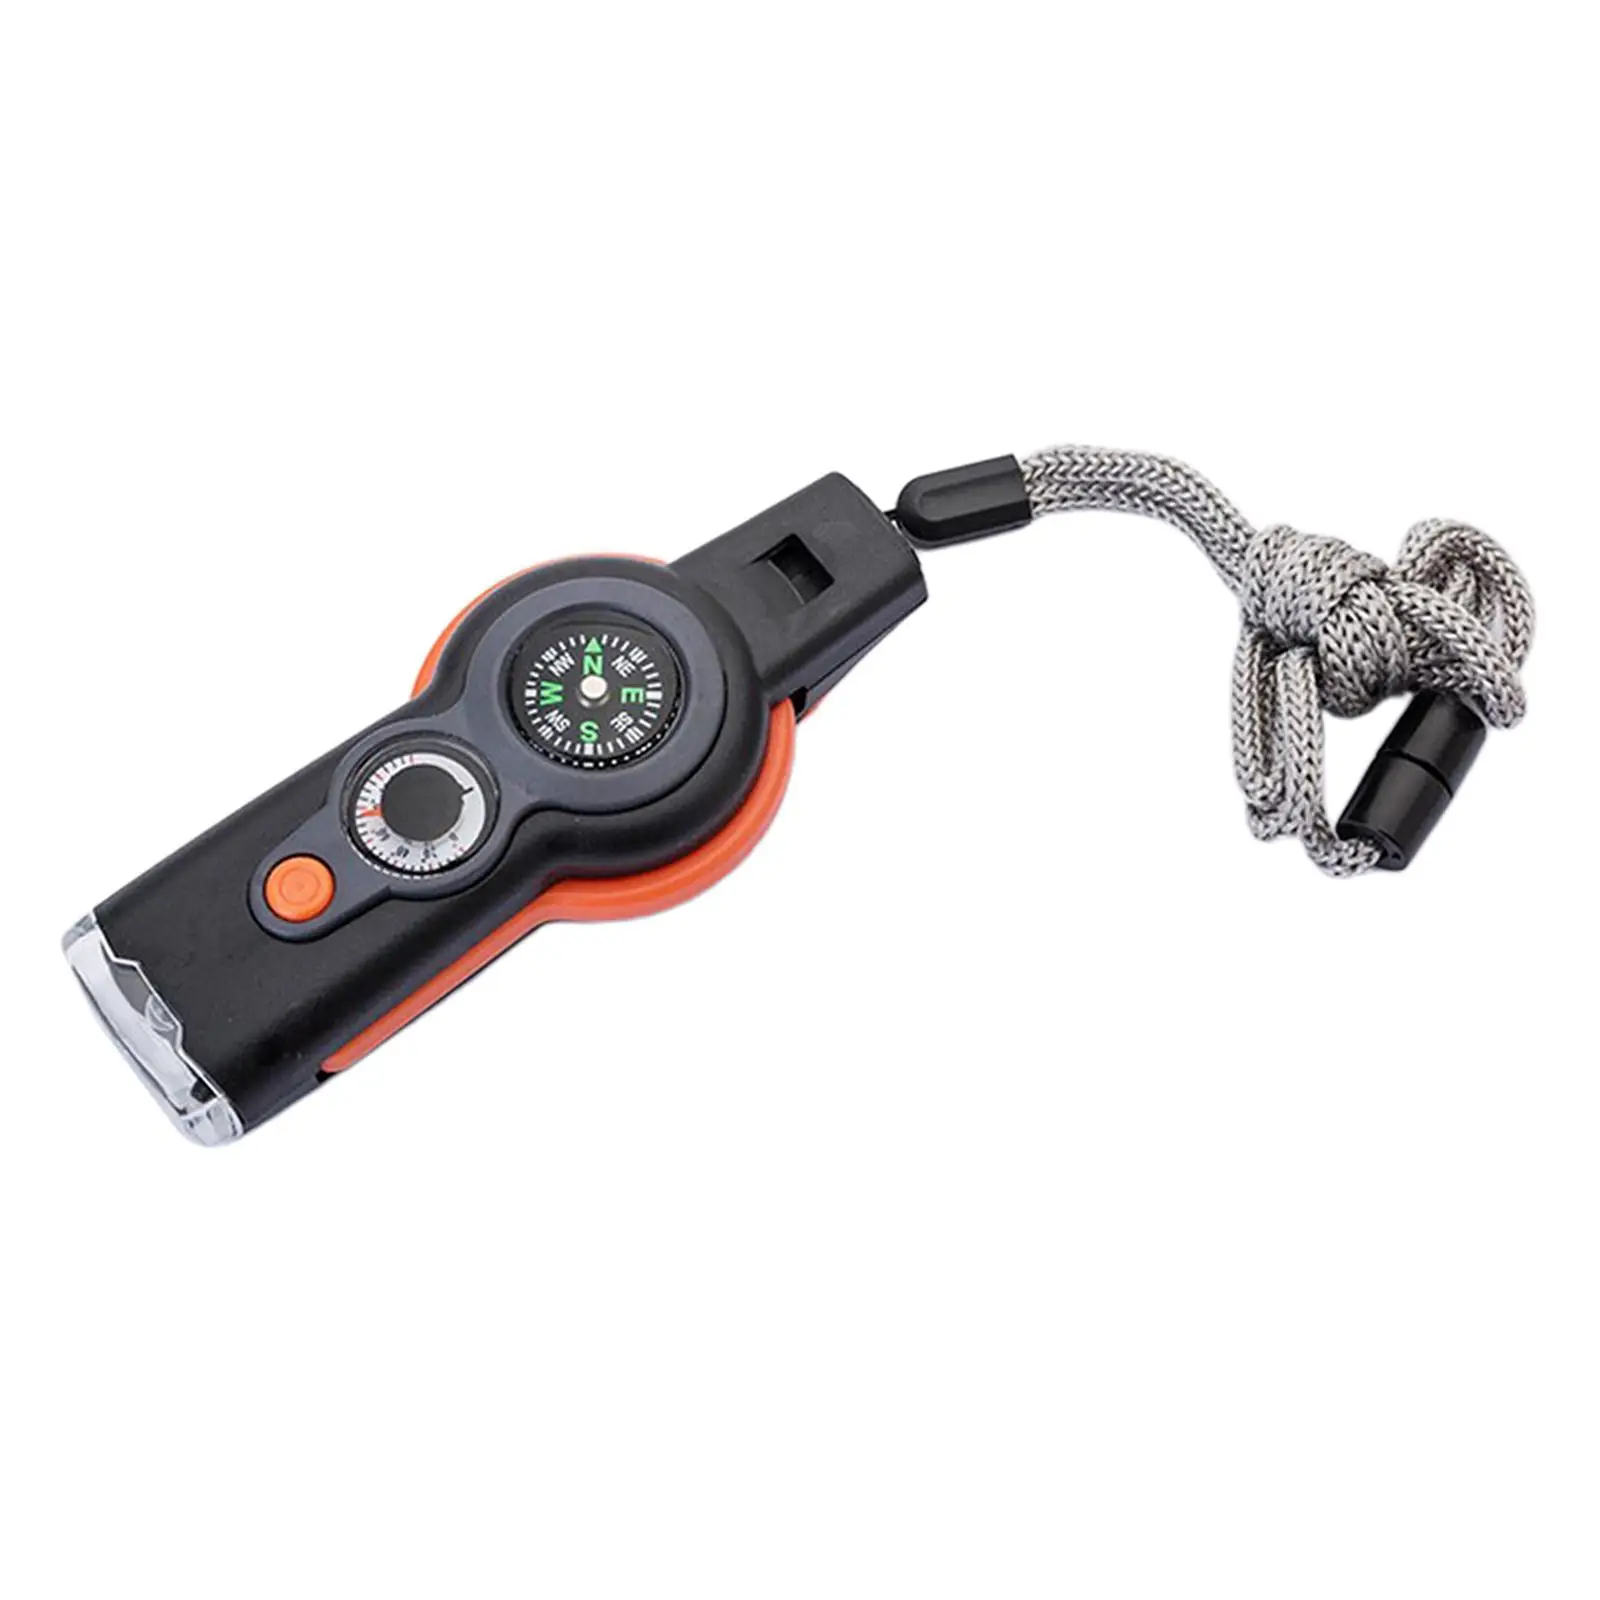 Emergency Survival Safety Whistle Lens Thermometer Keychain